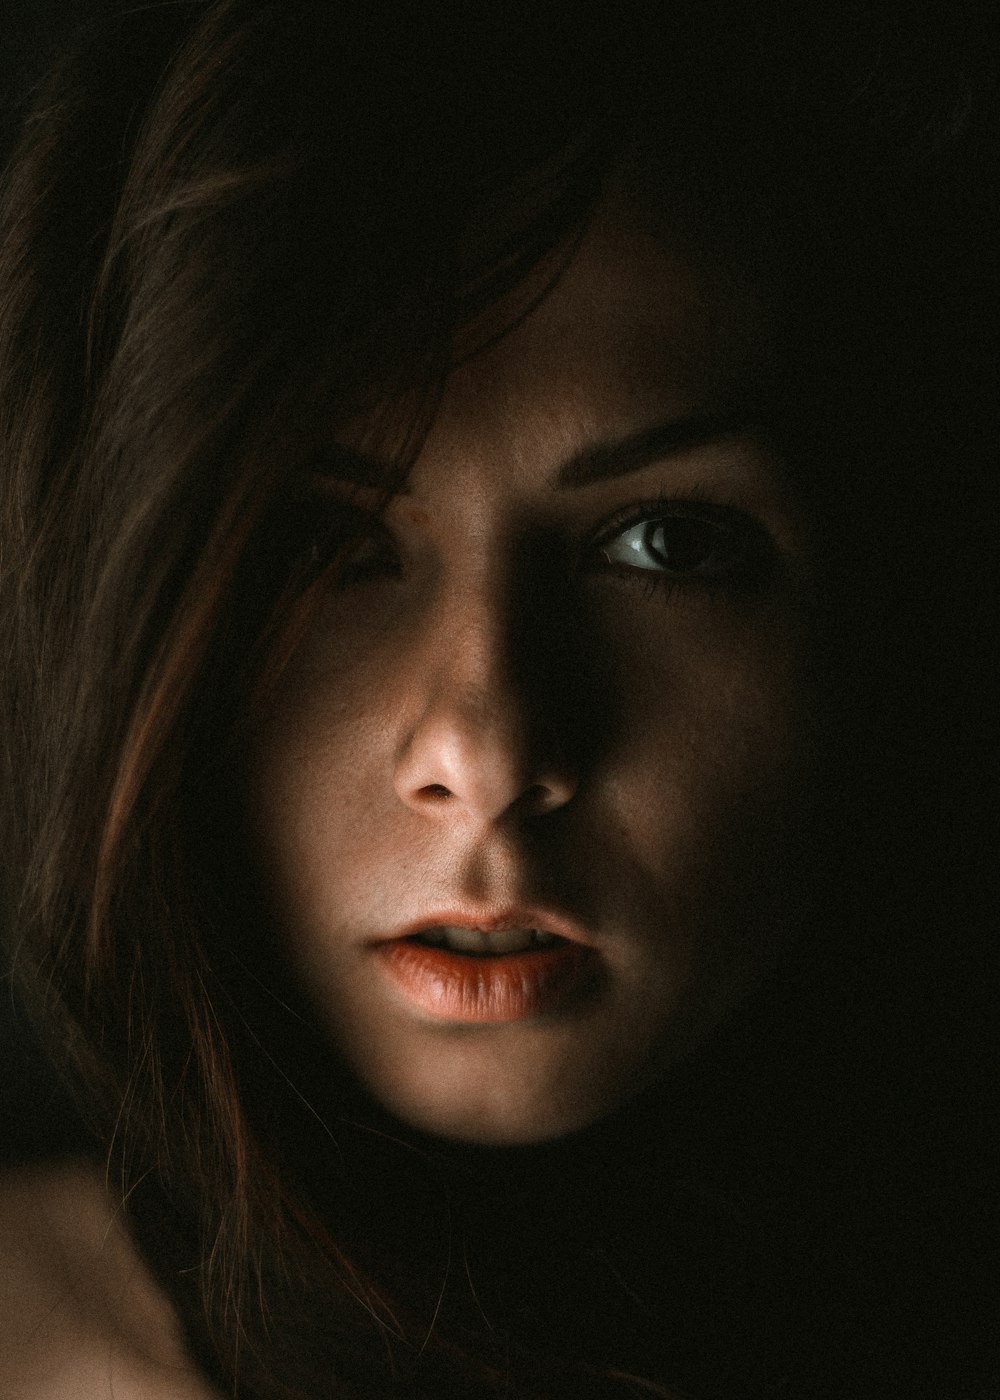 womans face in close up photography